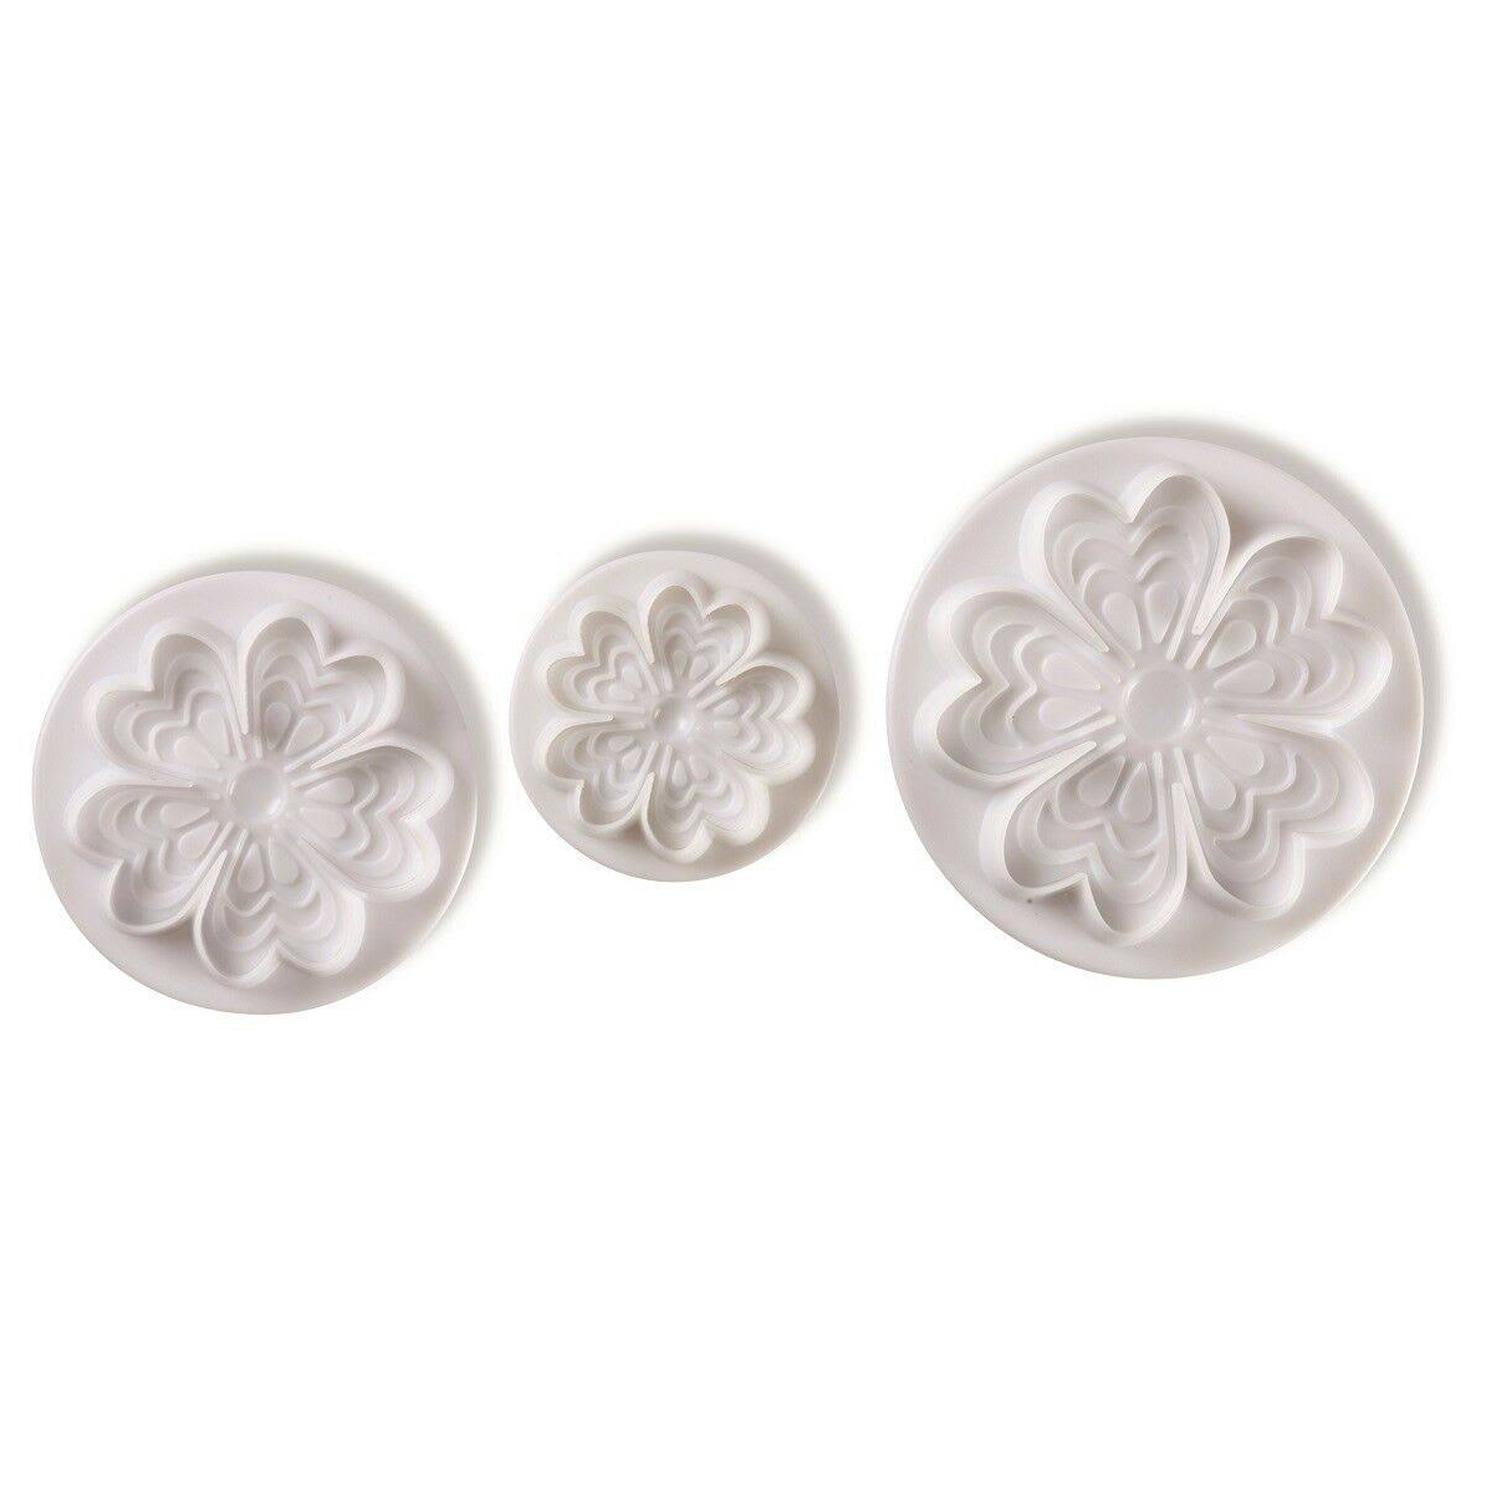 SET OF 3 PAVONI FLOWER PLUNGER CUTTER